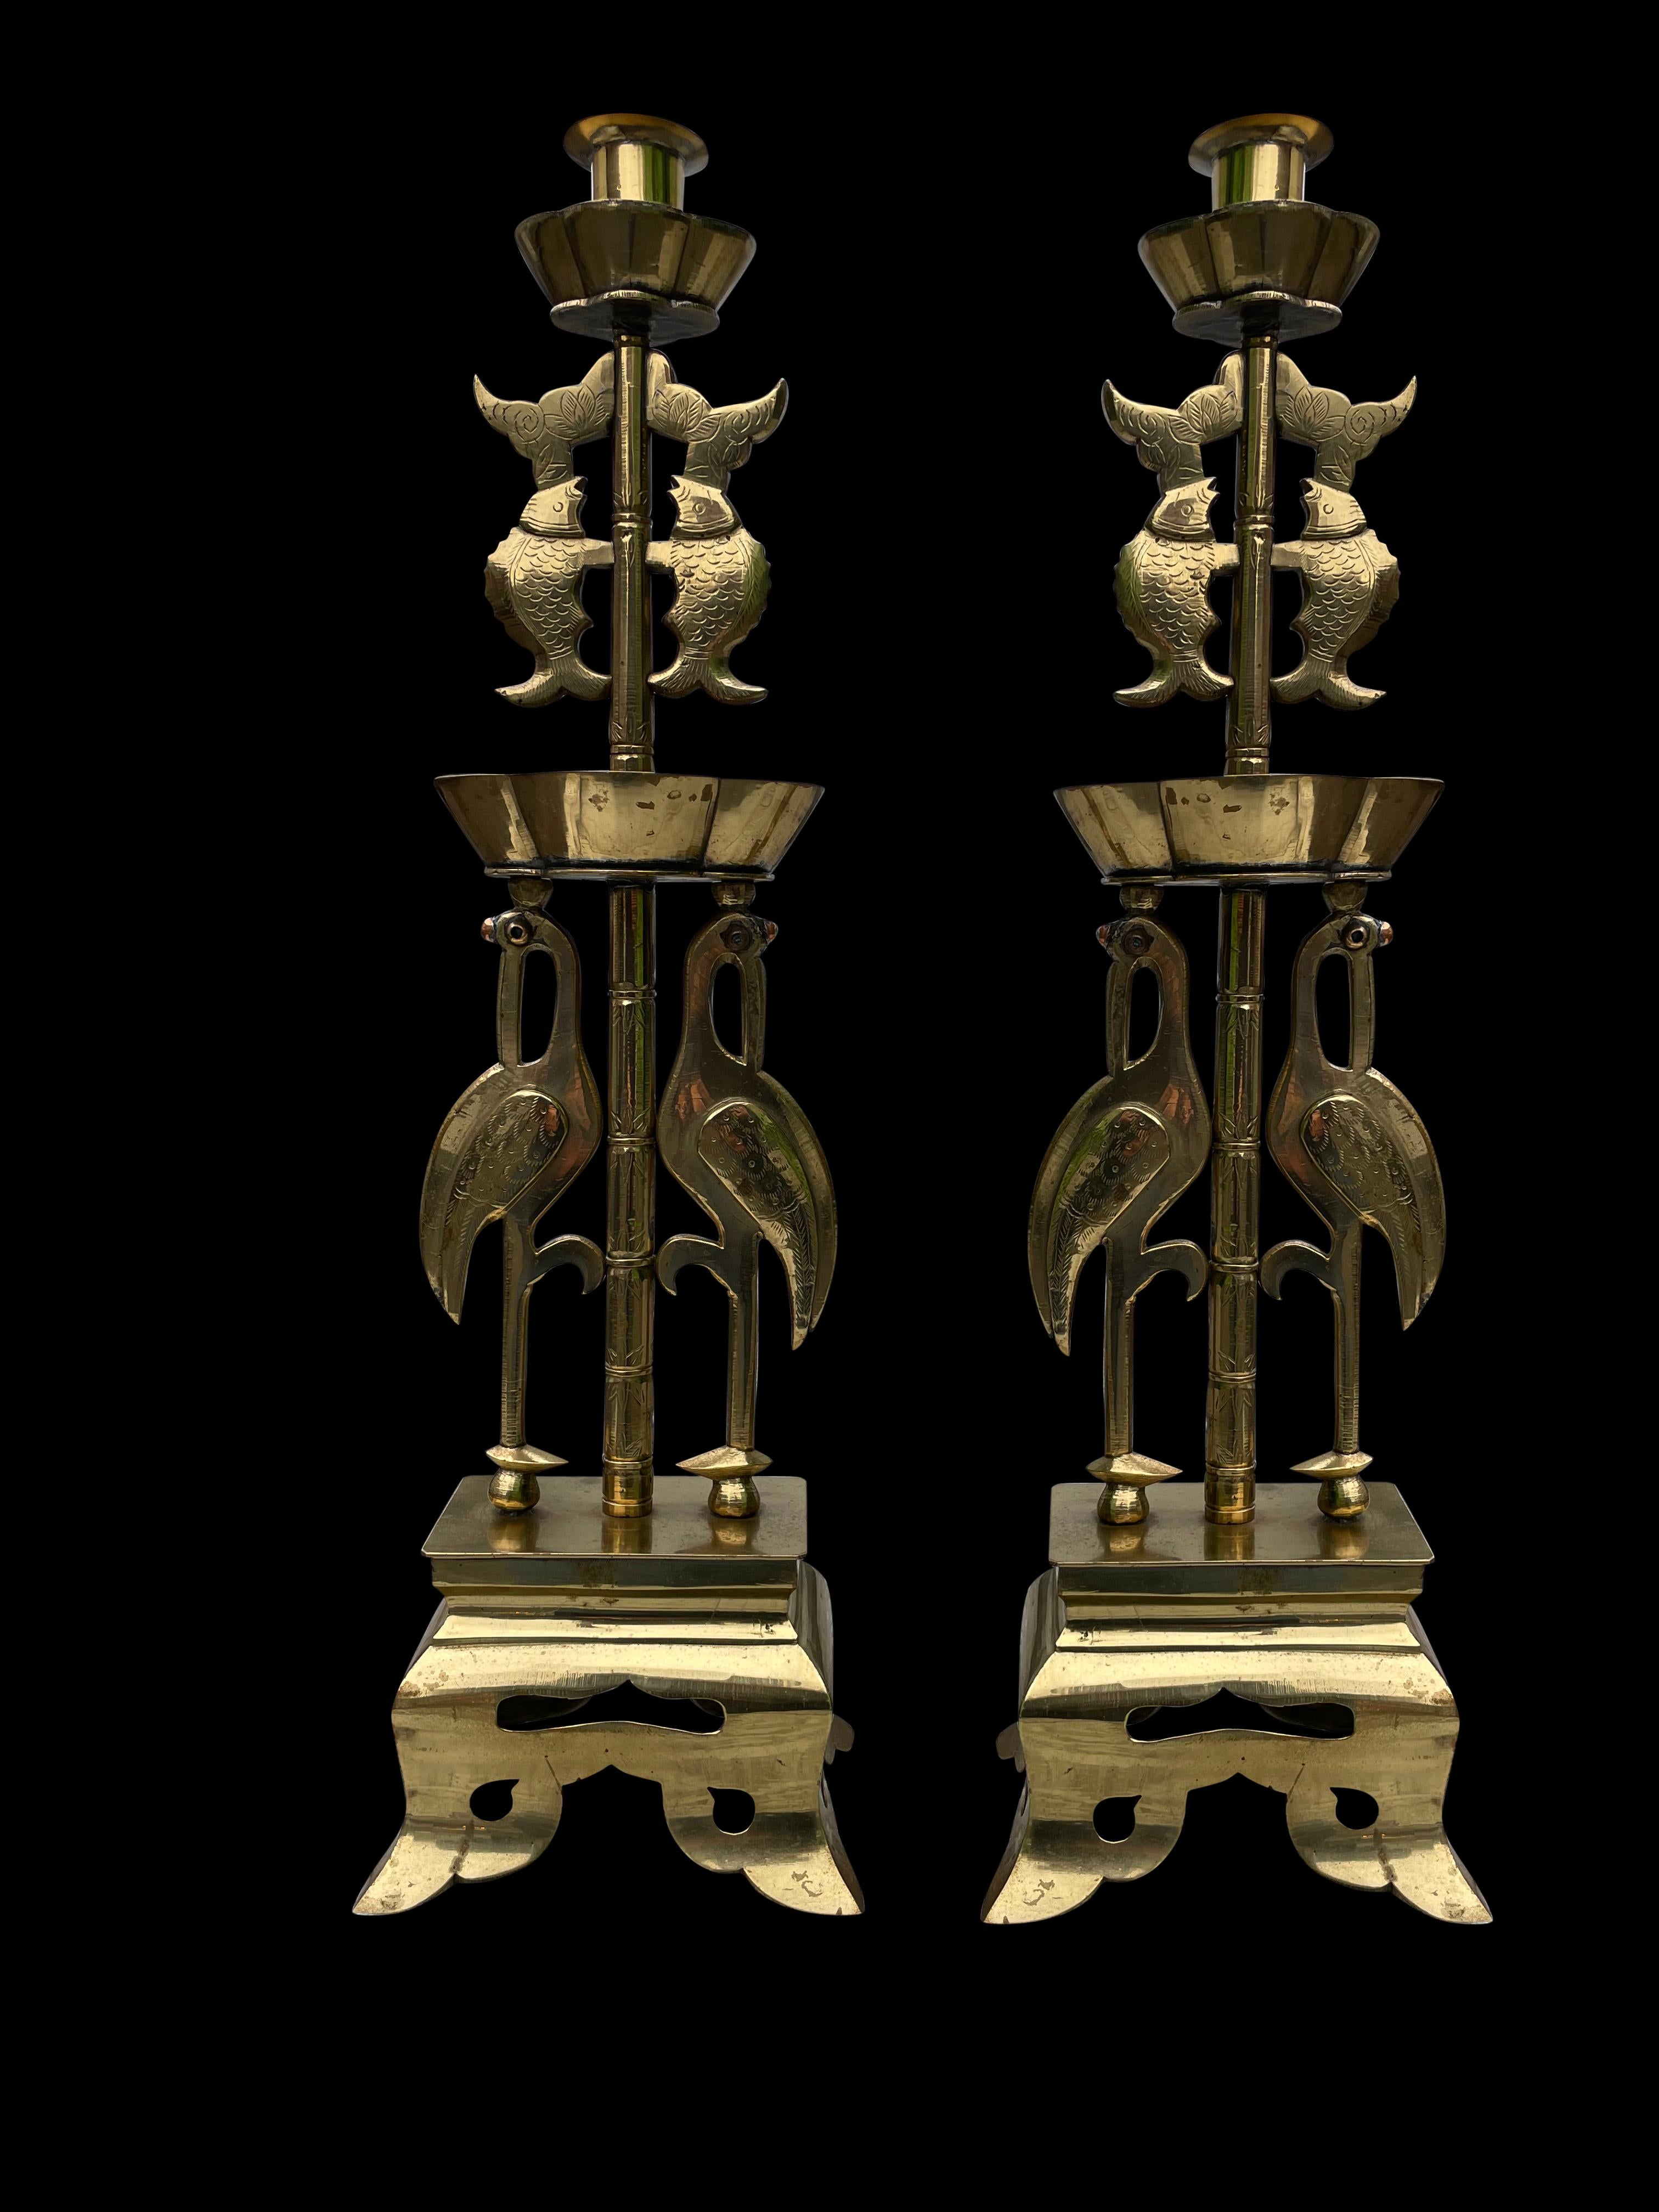 A superb pair of solid brass oriental Arts & Crafts style candlesticks, 20th century.